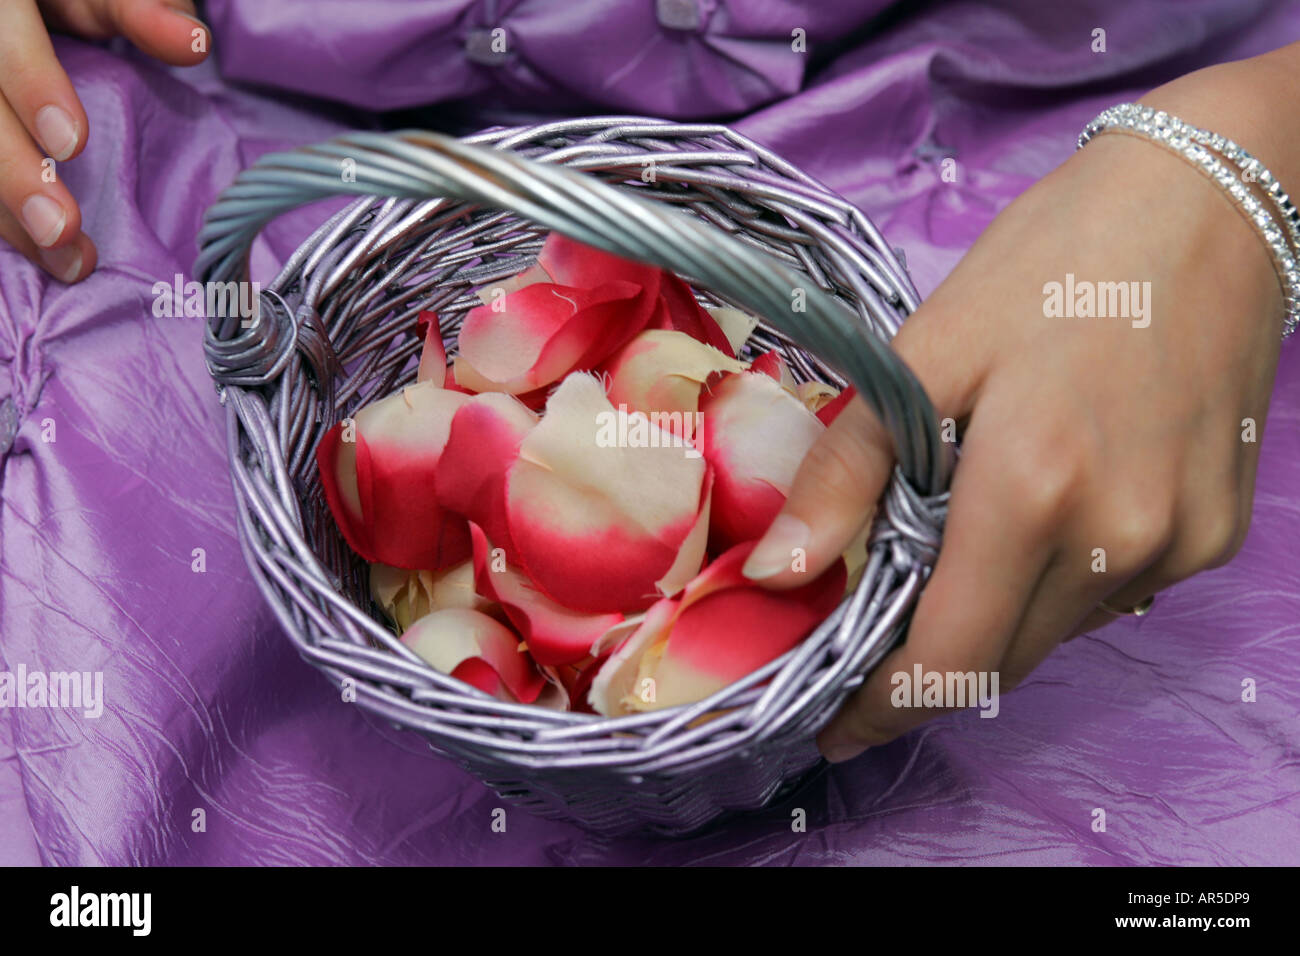 A close up portrait of a bridesmaid holding a basket of confetti to throw after a wedding ceremony Stock Photo